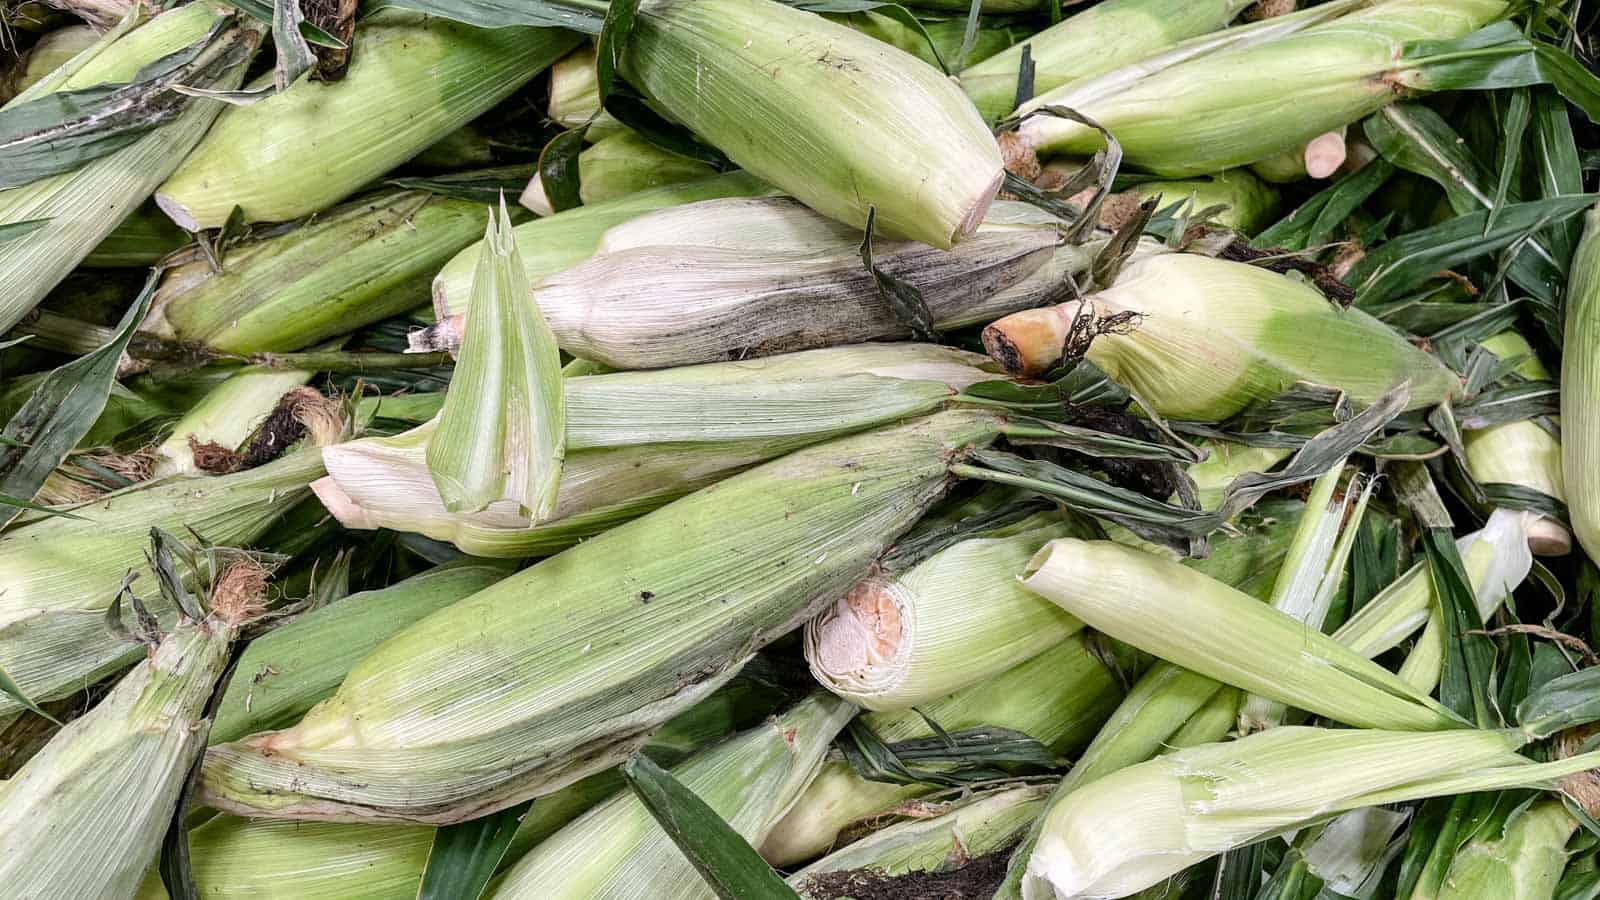 Corn with husks that are s،ing to mold